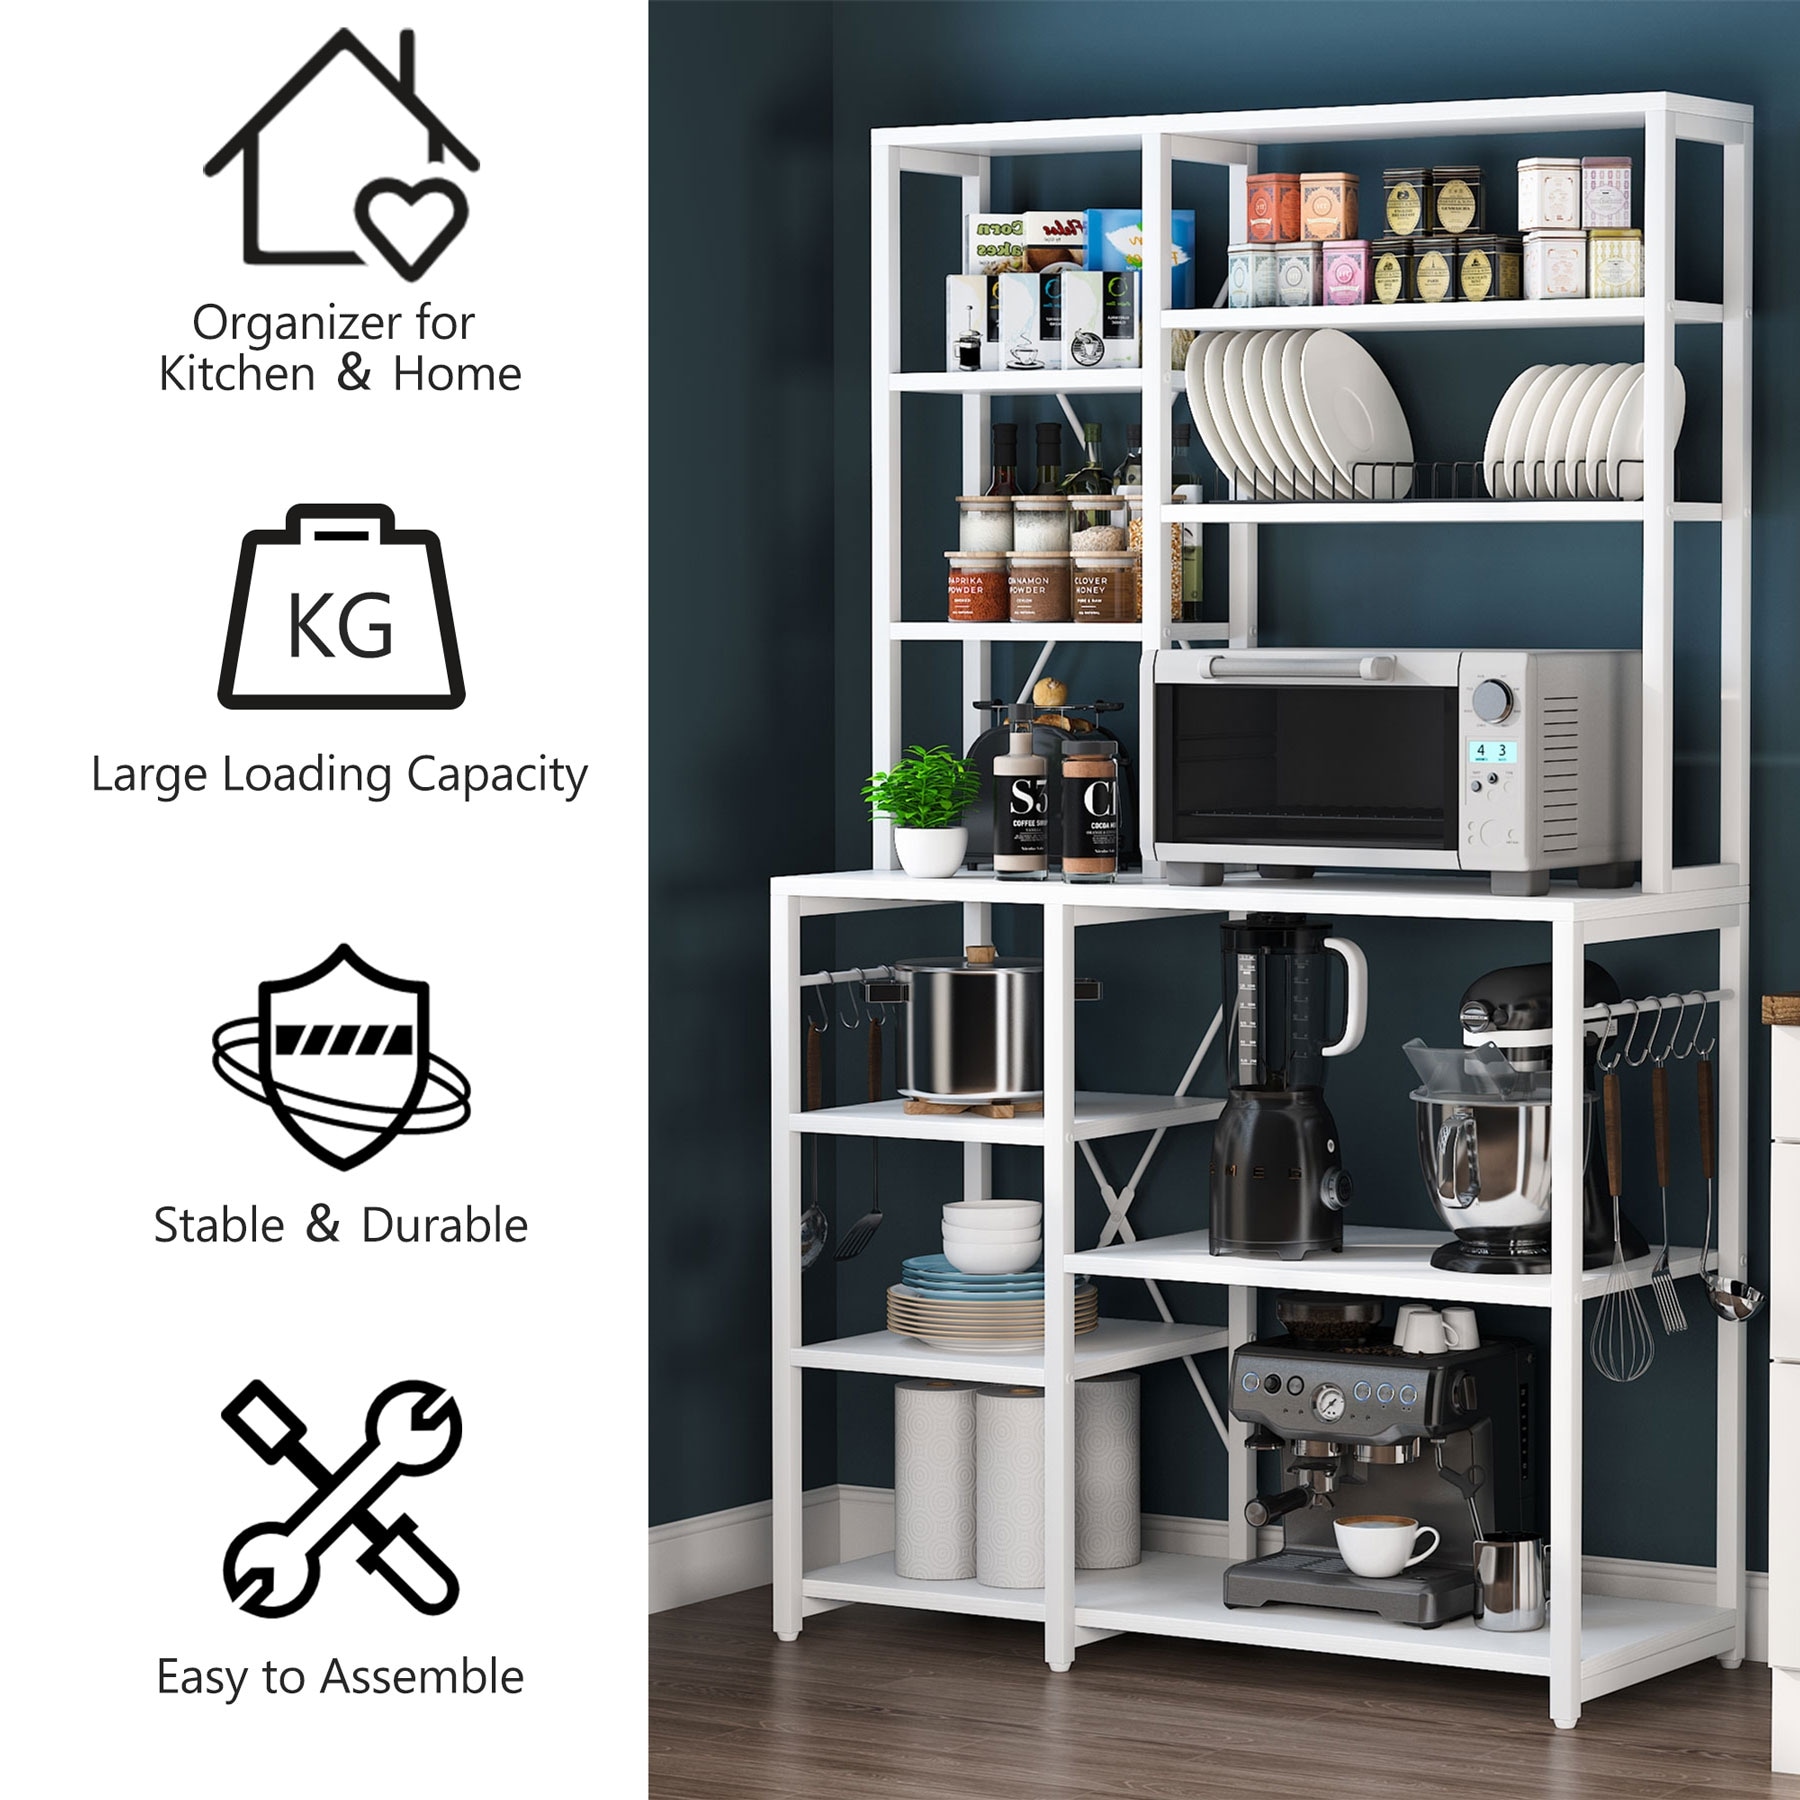 https://ak1.ostkcdn.com/images/products/is/images/direct/37eb15b75cec38cfb5847c6f059a36d4b616eb81/Kitchen-Bakers-Rack-with-Hutch-and-Shelves%2C5-Tier-Kitchen-Utility-Storage-Shelf.jpg